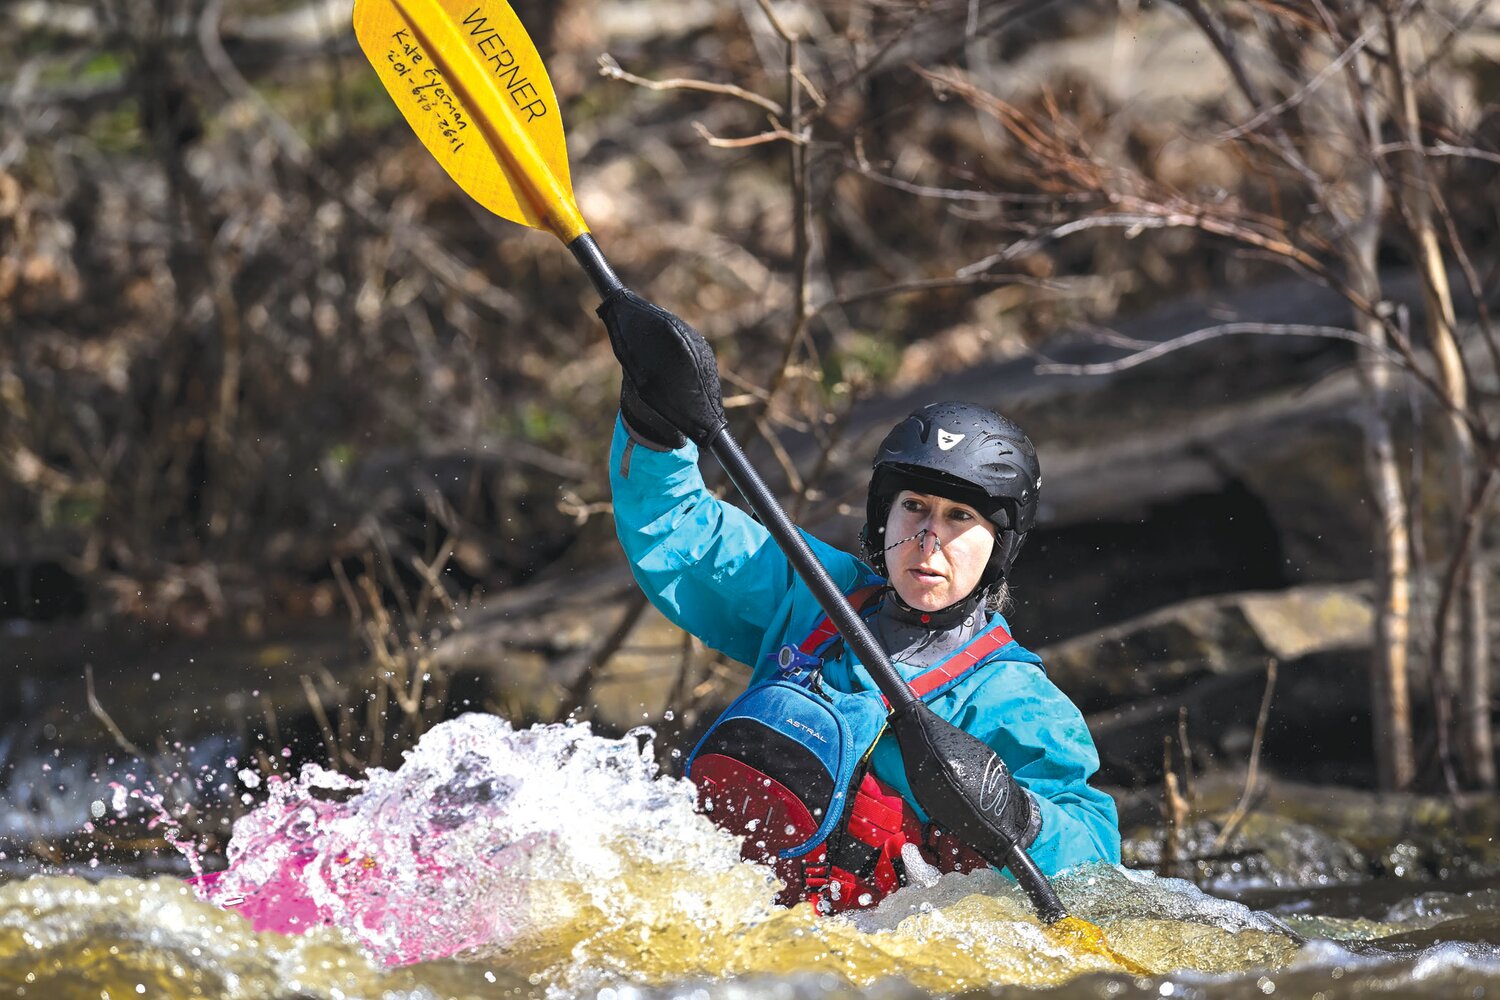 Kate Eyerman drops into some rapids and turns back downstream.